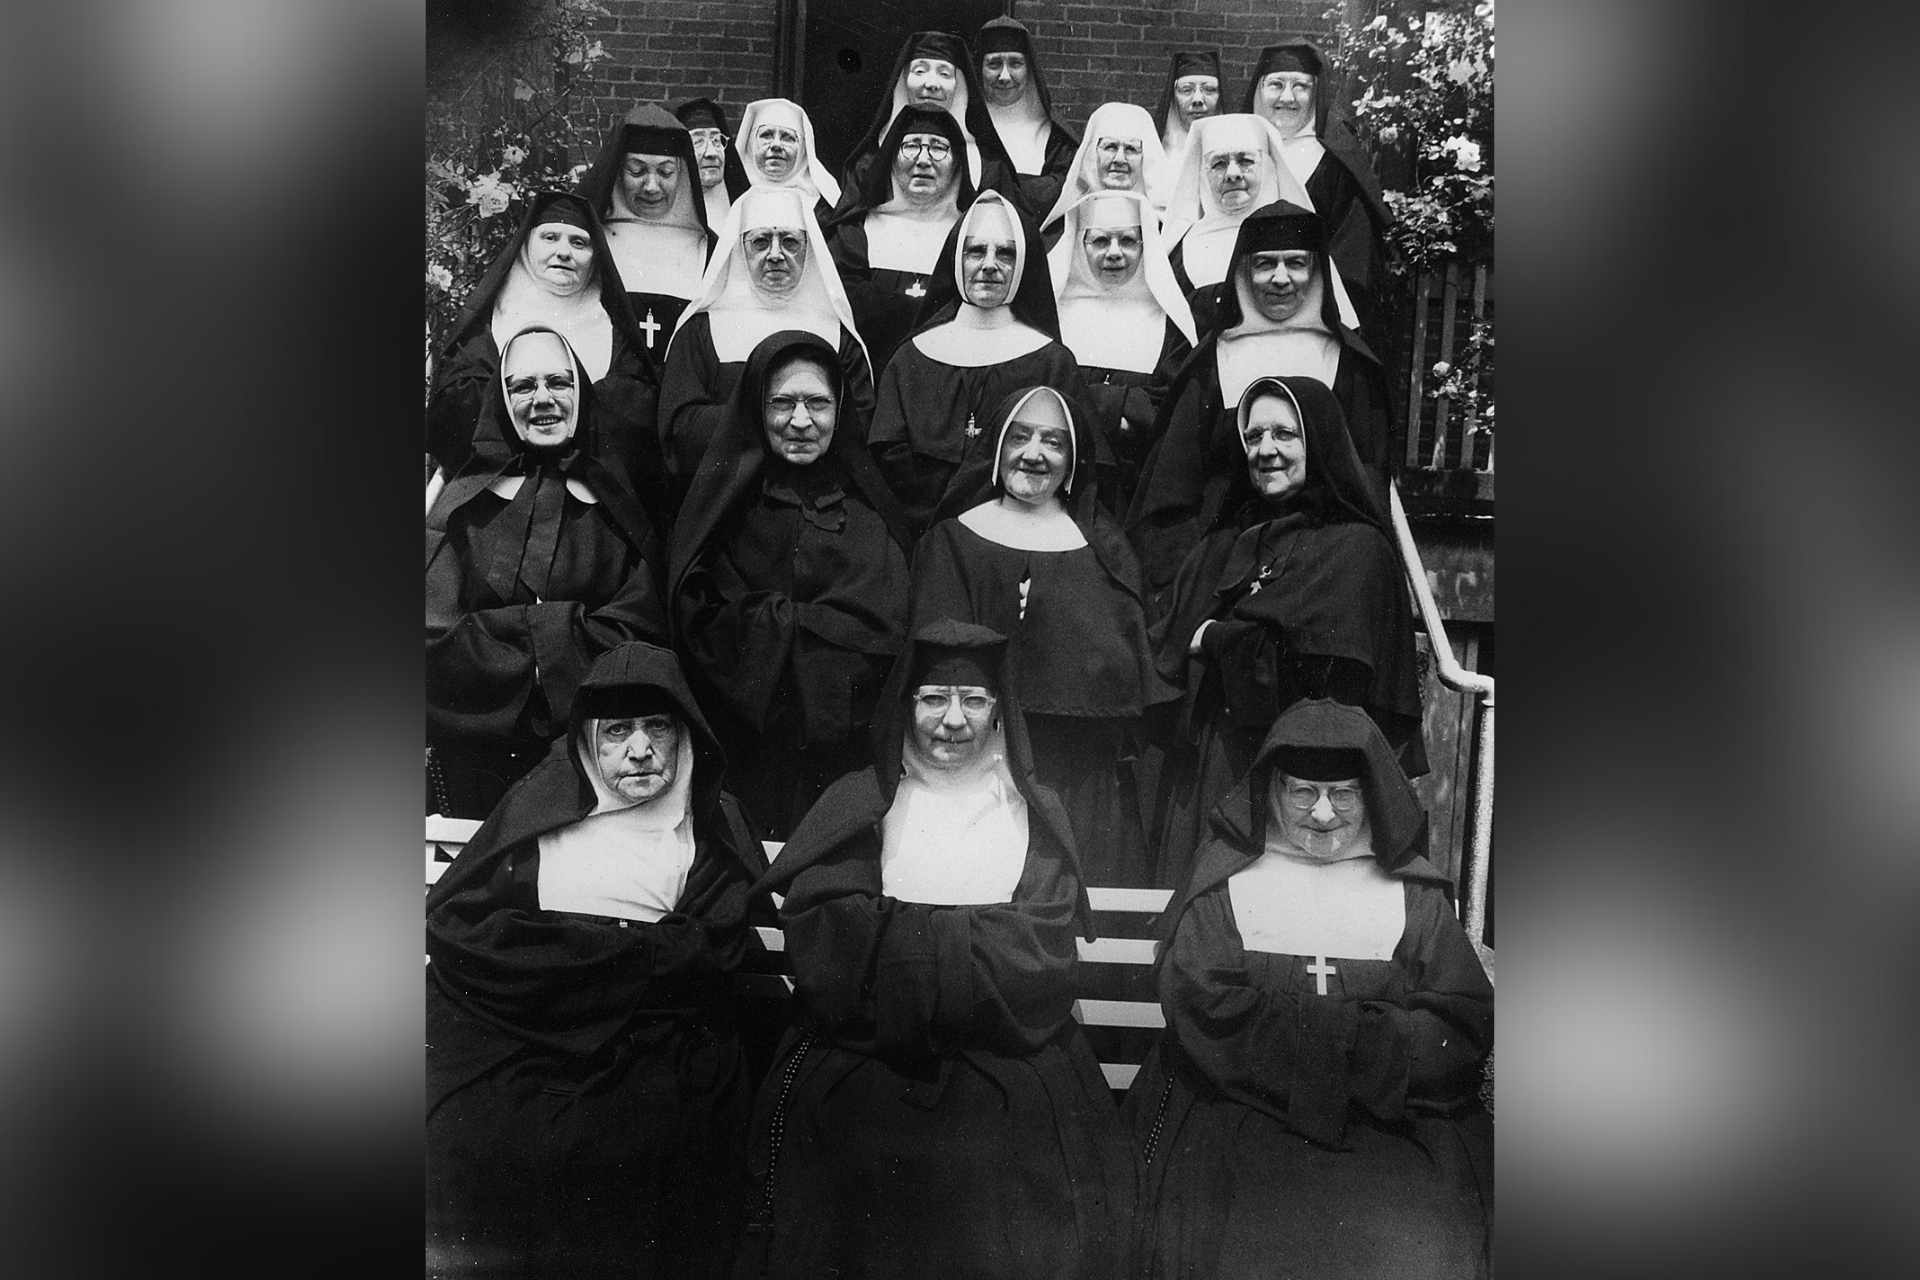 DeSales Heights Nuns in 1948